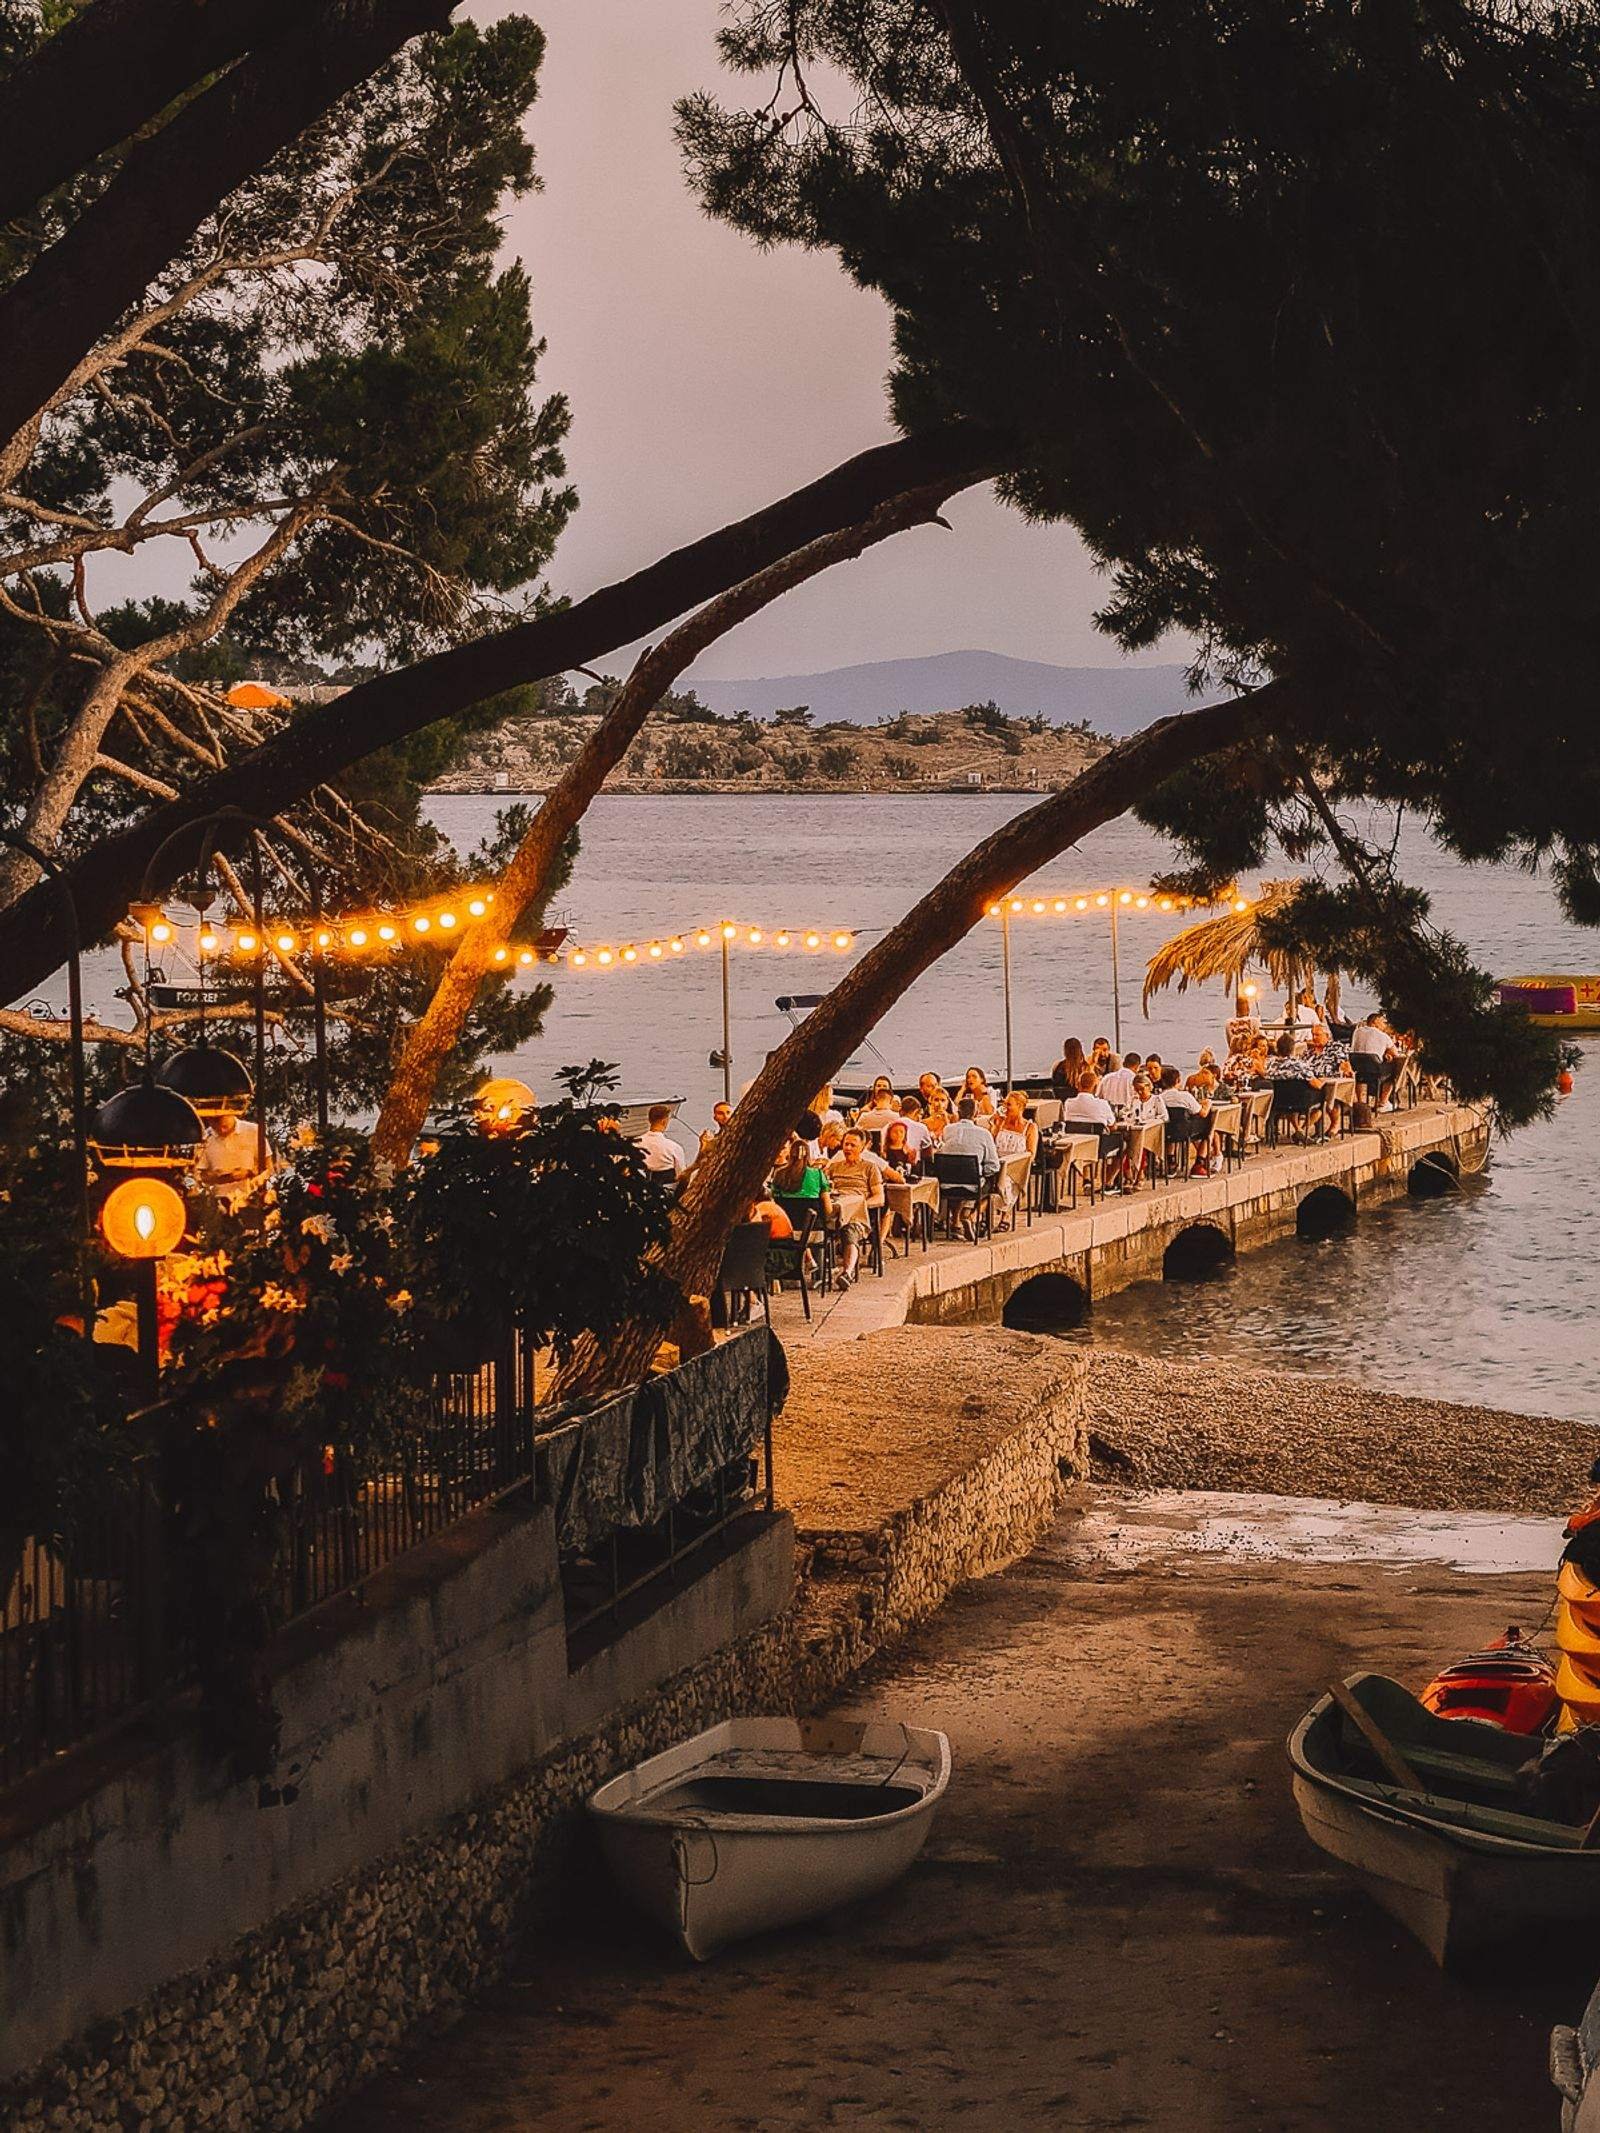 restaurant seating along a pier with fairy lights strung in the trees at dusk